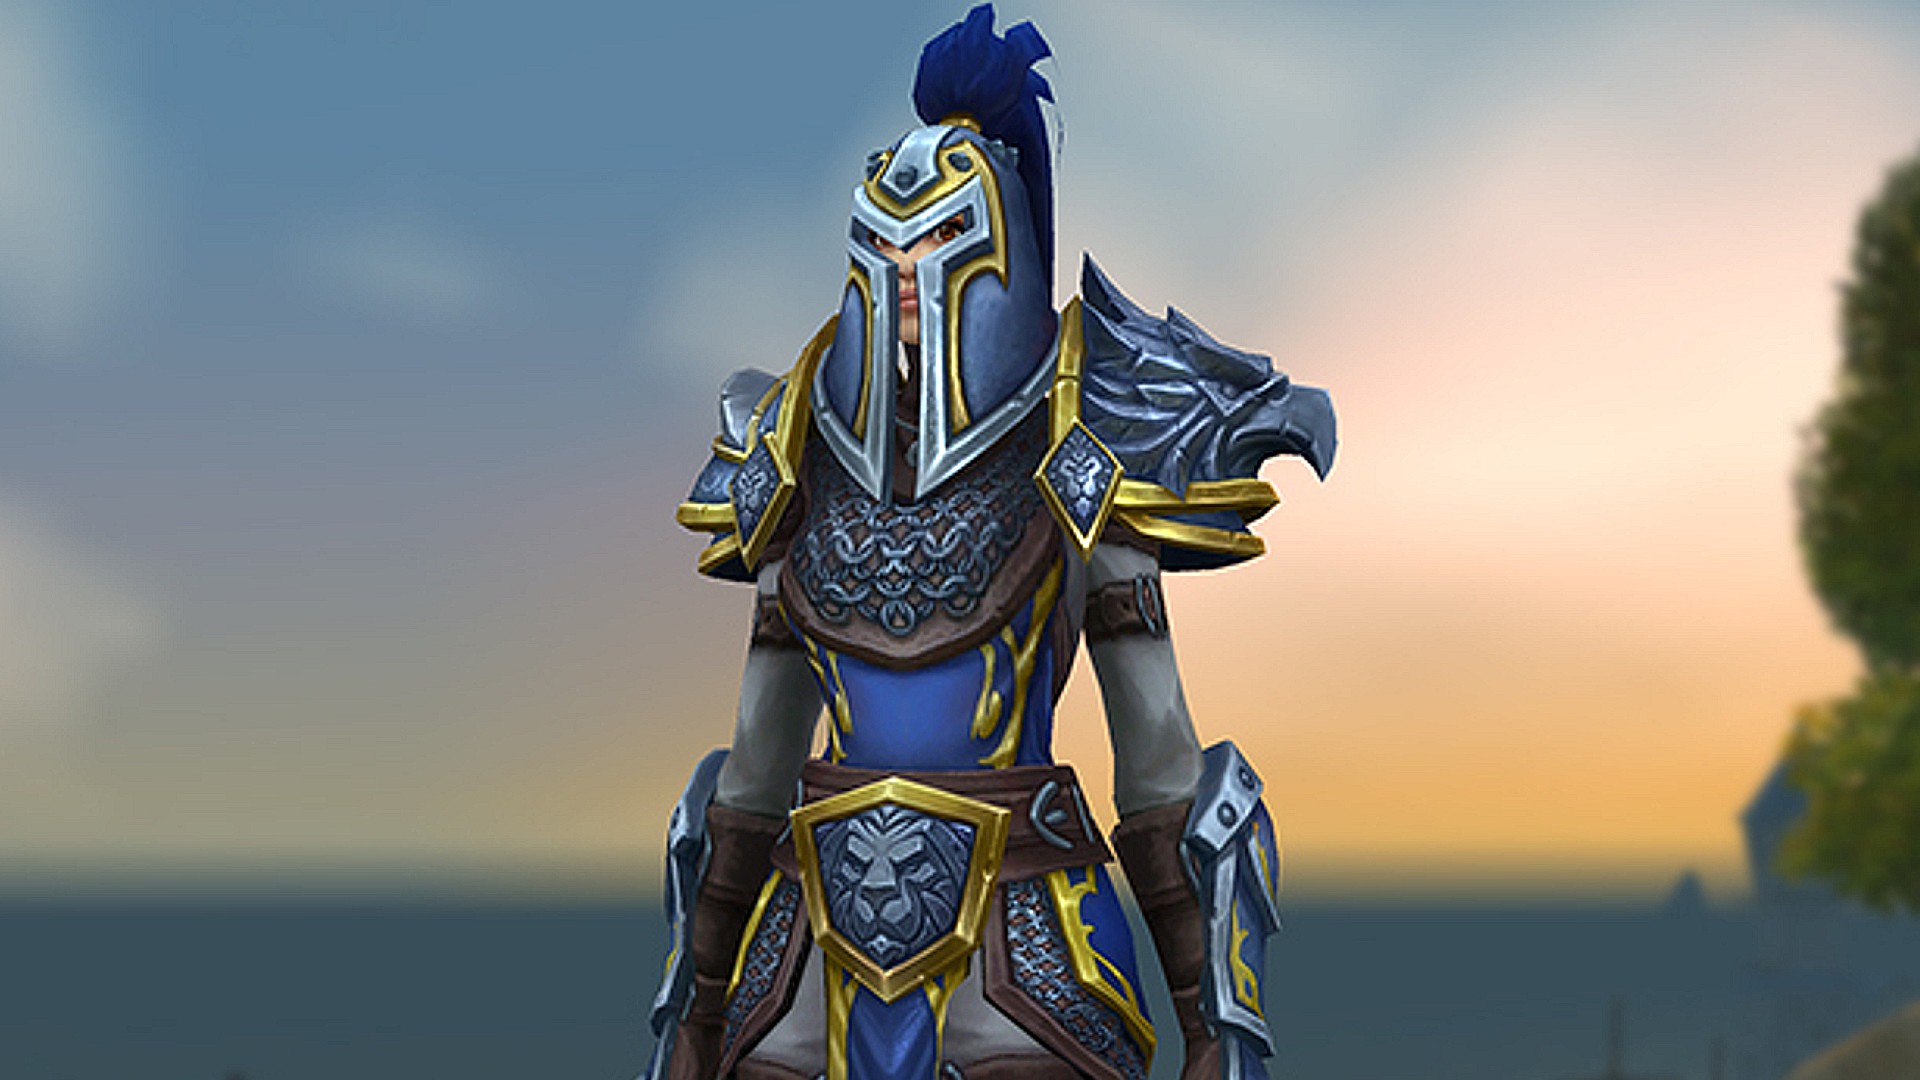 WoW Dragonflight Heritage Armour is good, but still no Night Elf